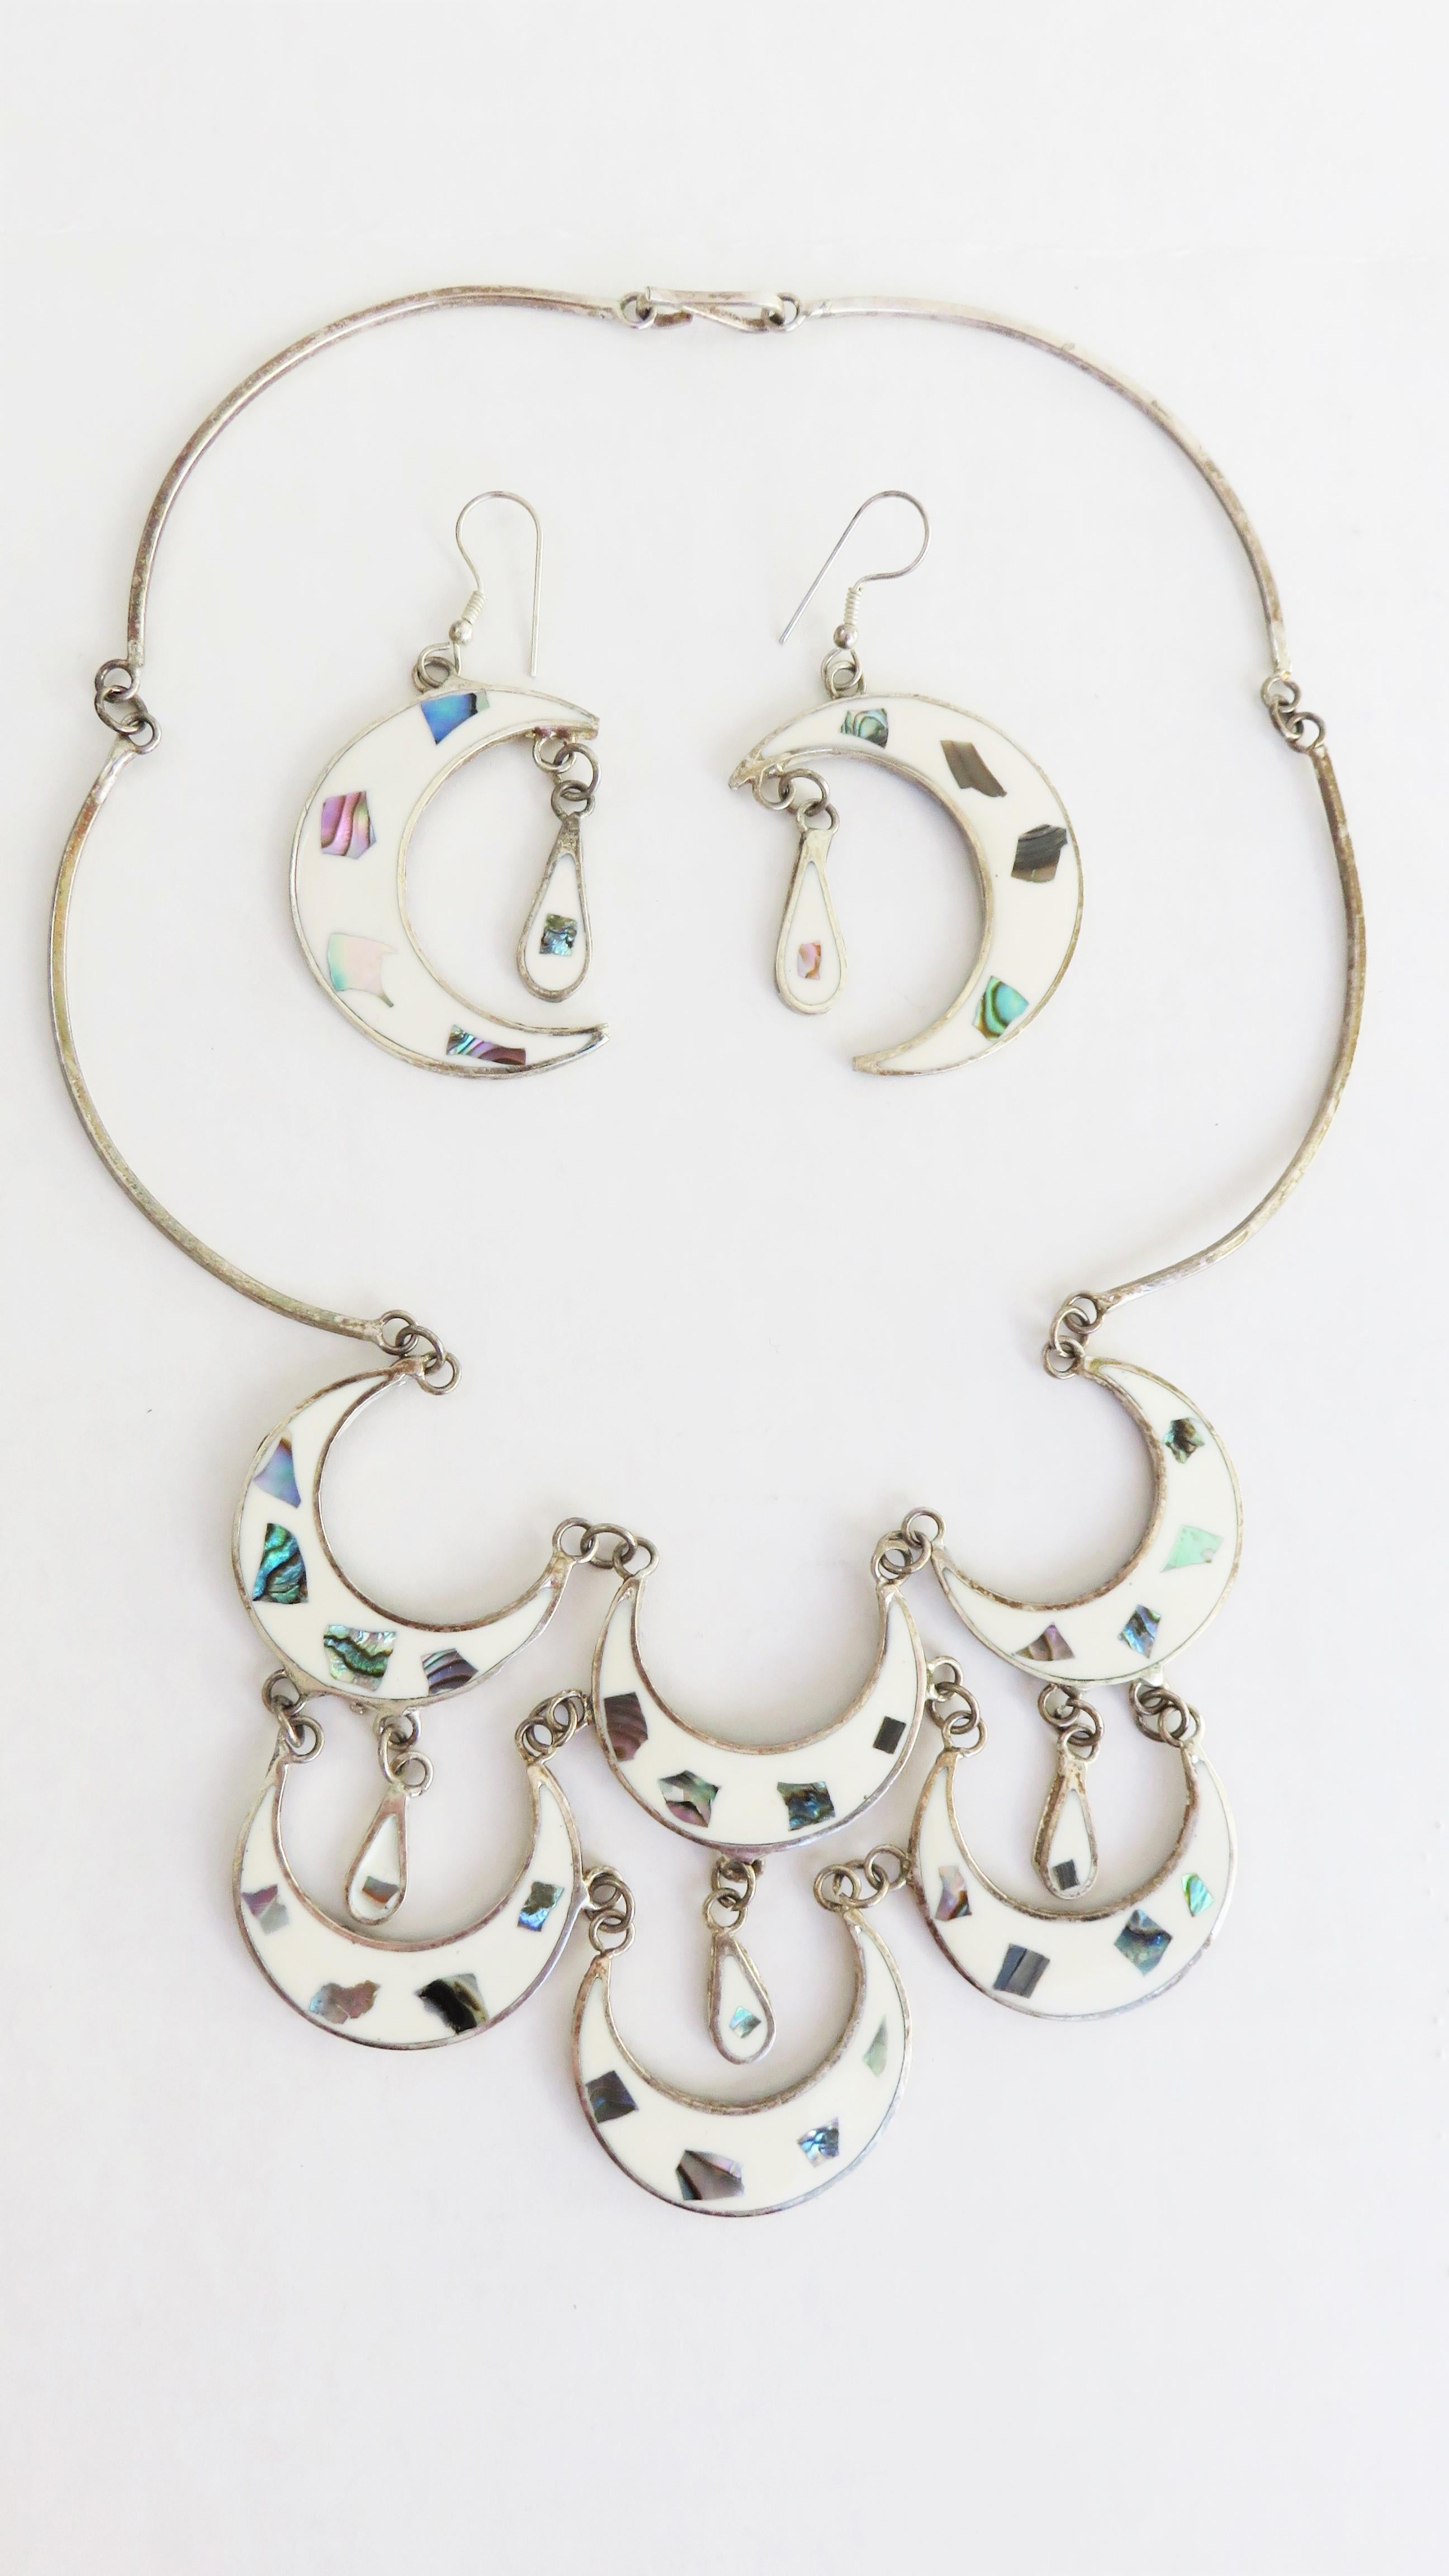 Mexican Abalone Inlaid Silver Necklace and Pierced Earrings Set For Sale 3